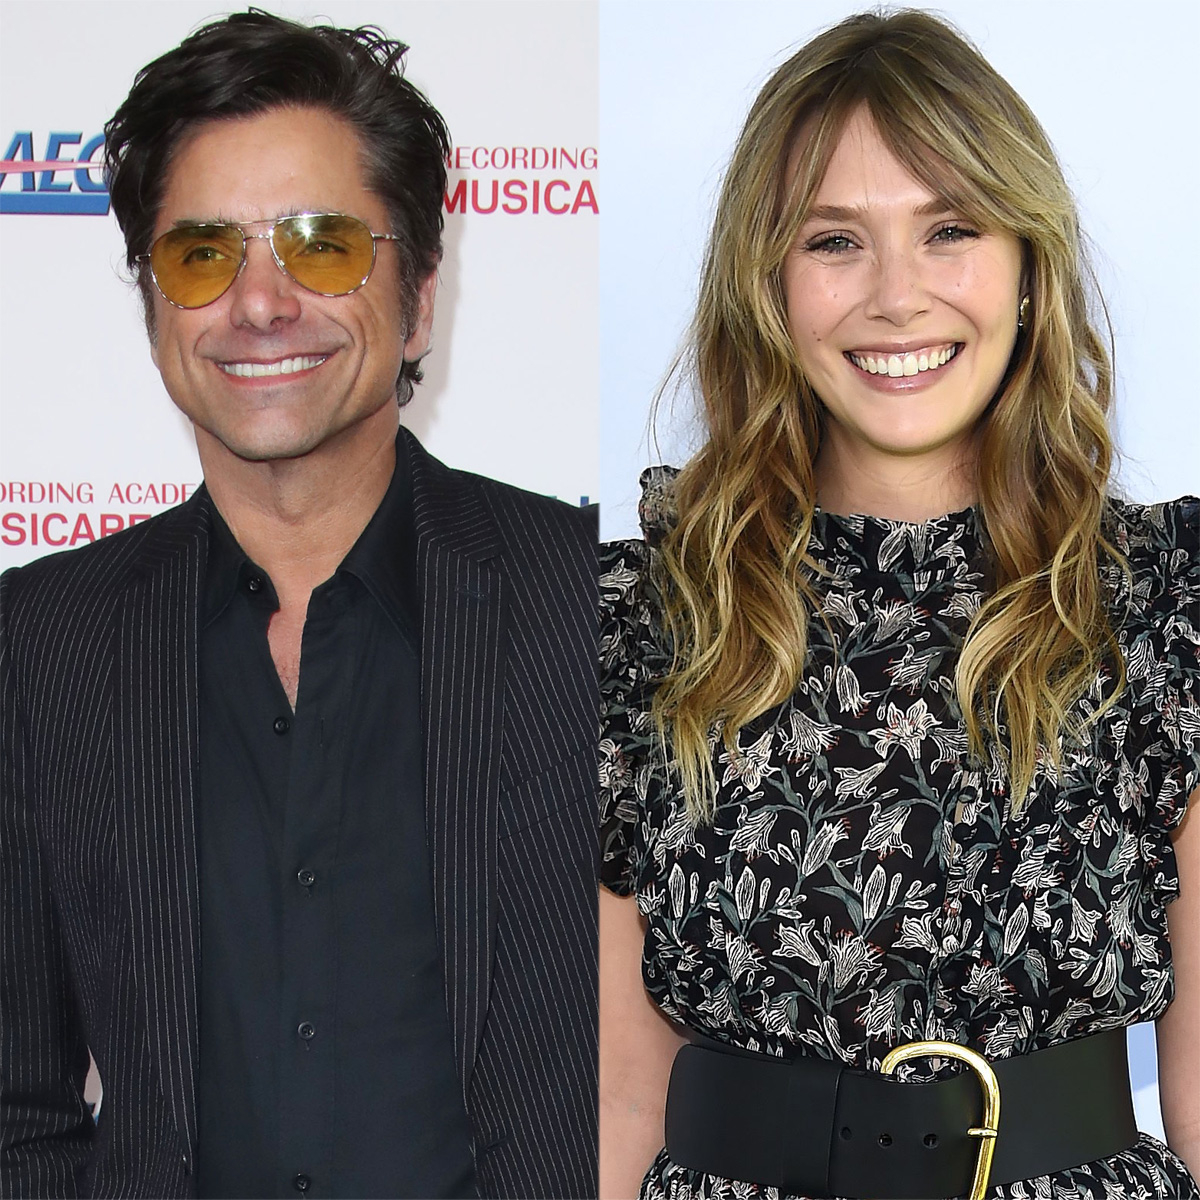 John Stamos shares unseen complete house photo with Elizabeth Olsen